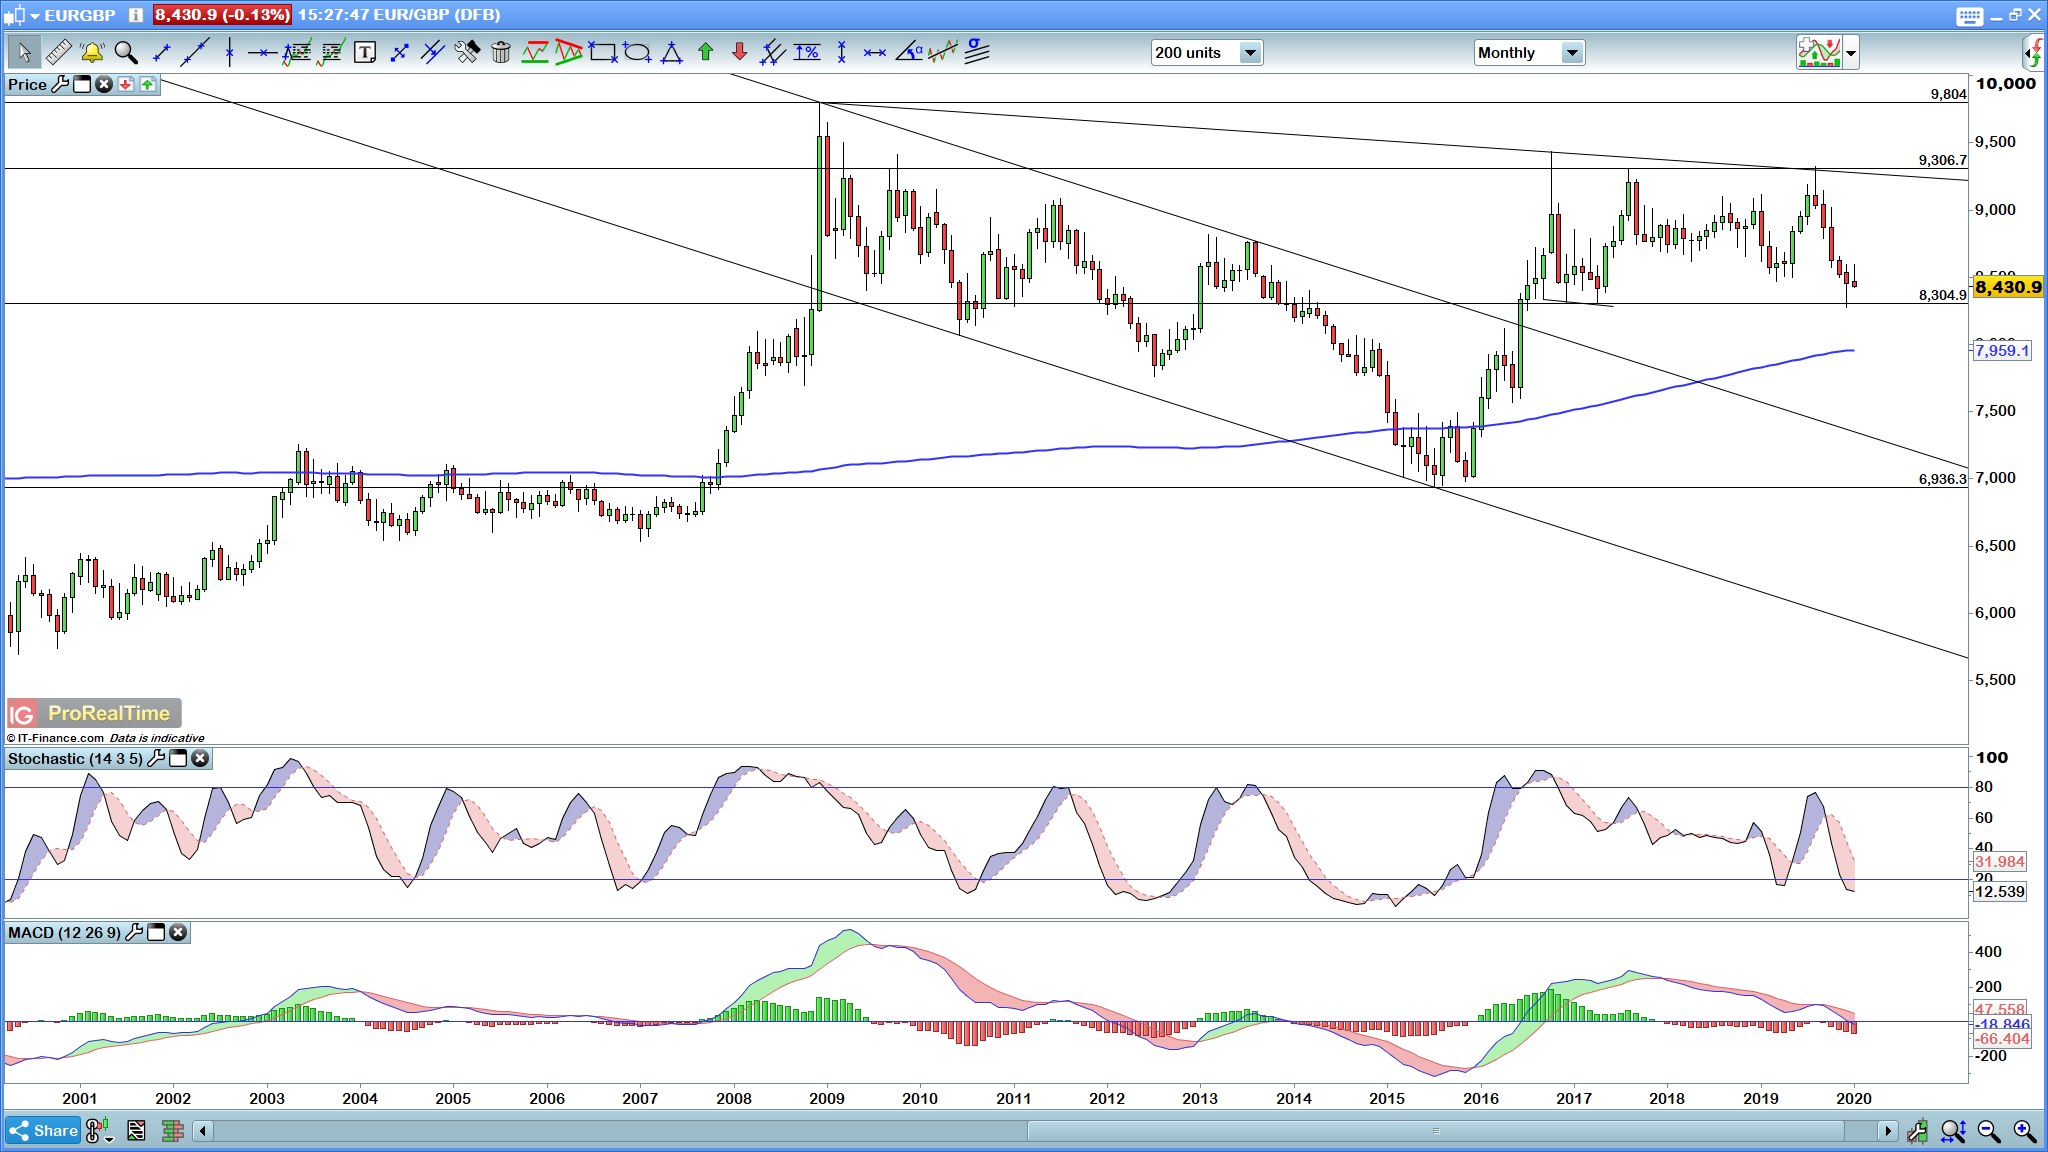 EUR/GBP monthly chart